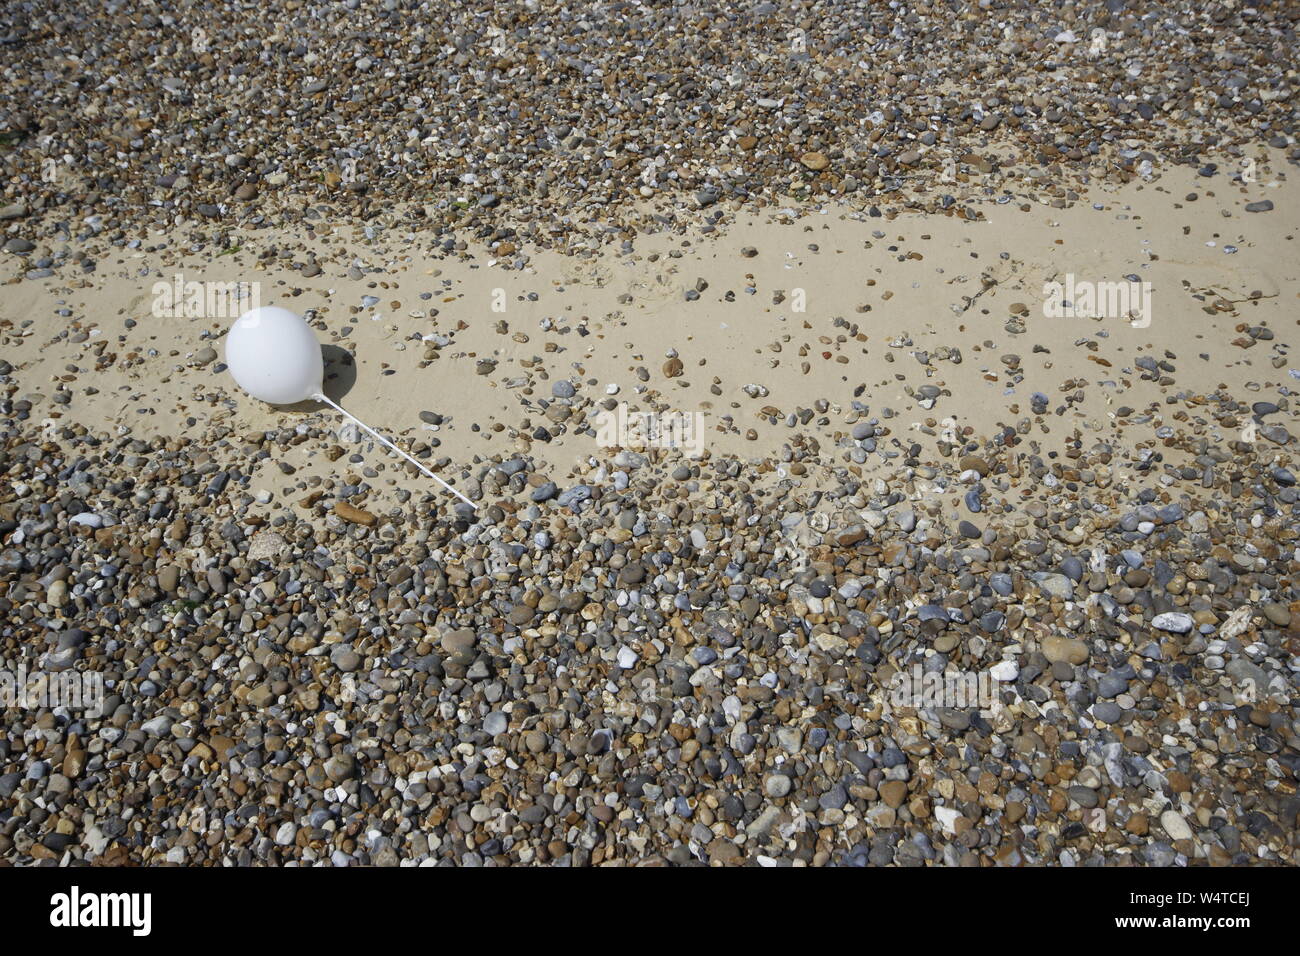 solitary white balloon lying on a pebble and sand beach Stock Photo